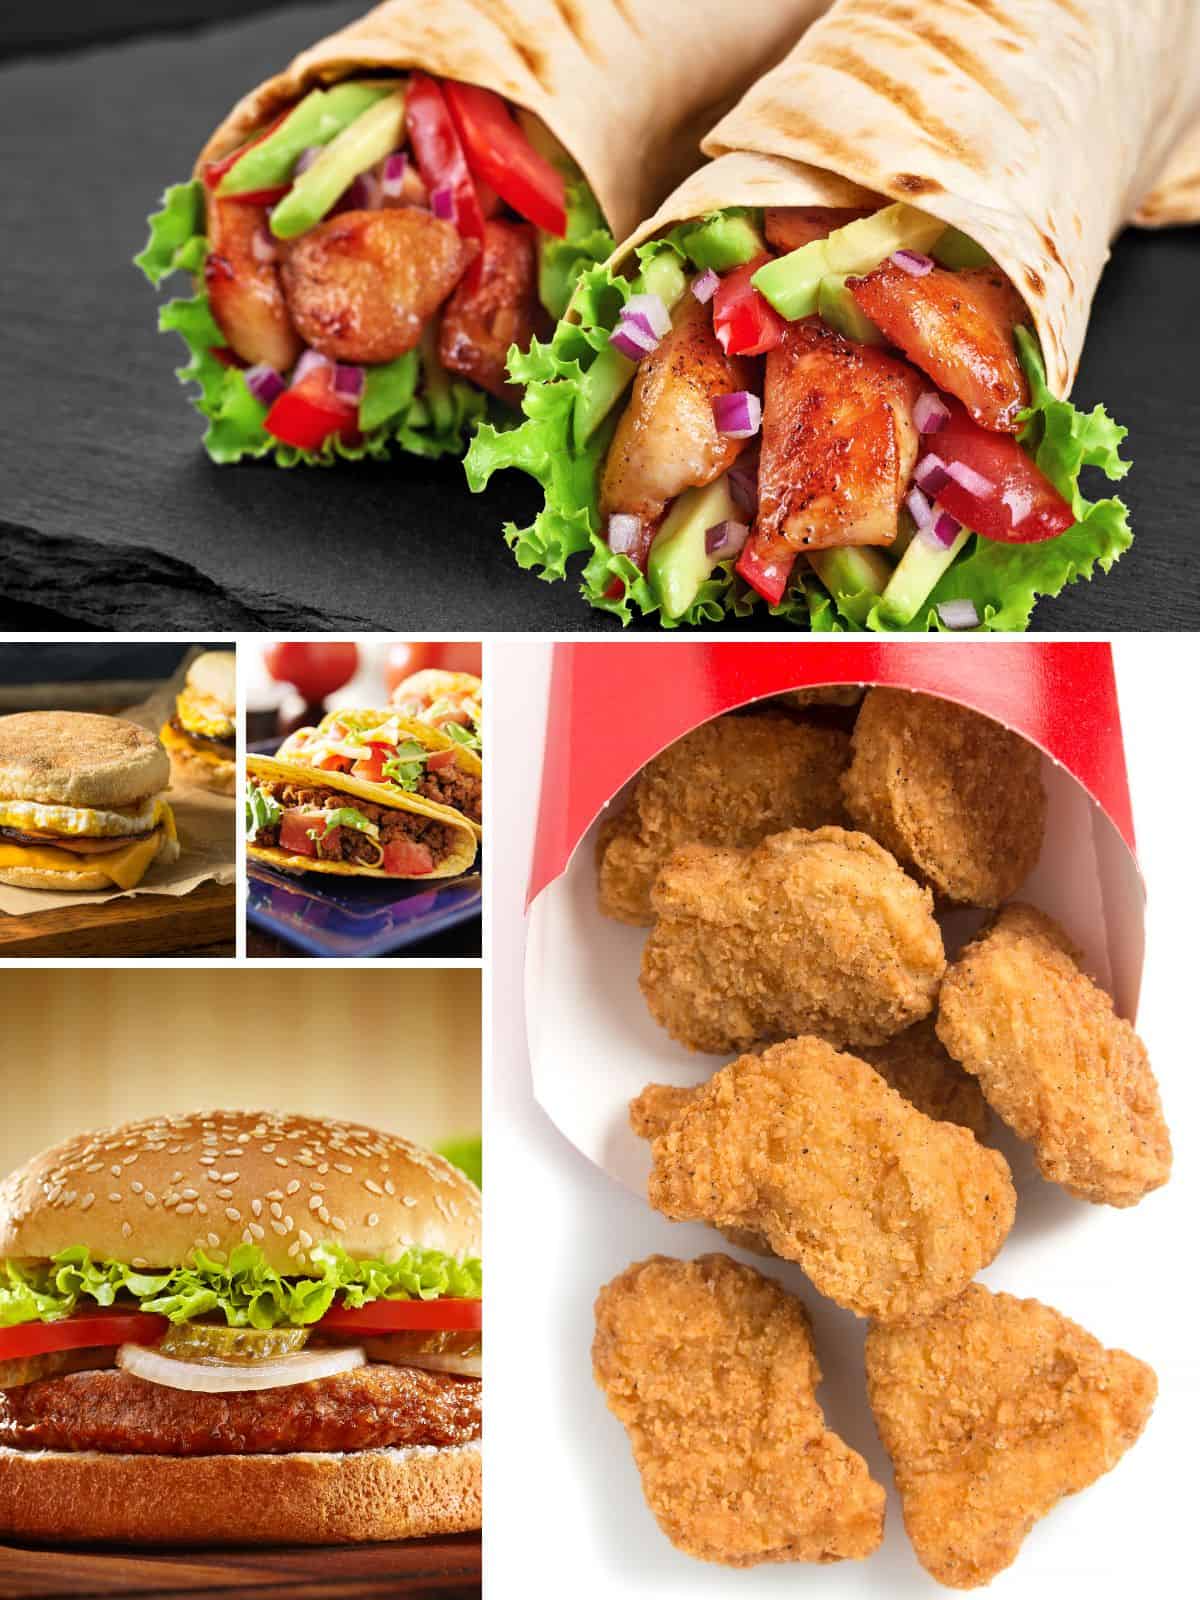 A collage of fast foods suitable for Weight Watchers